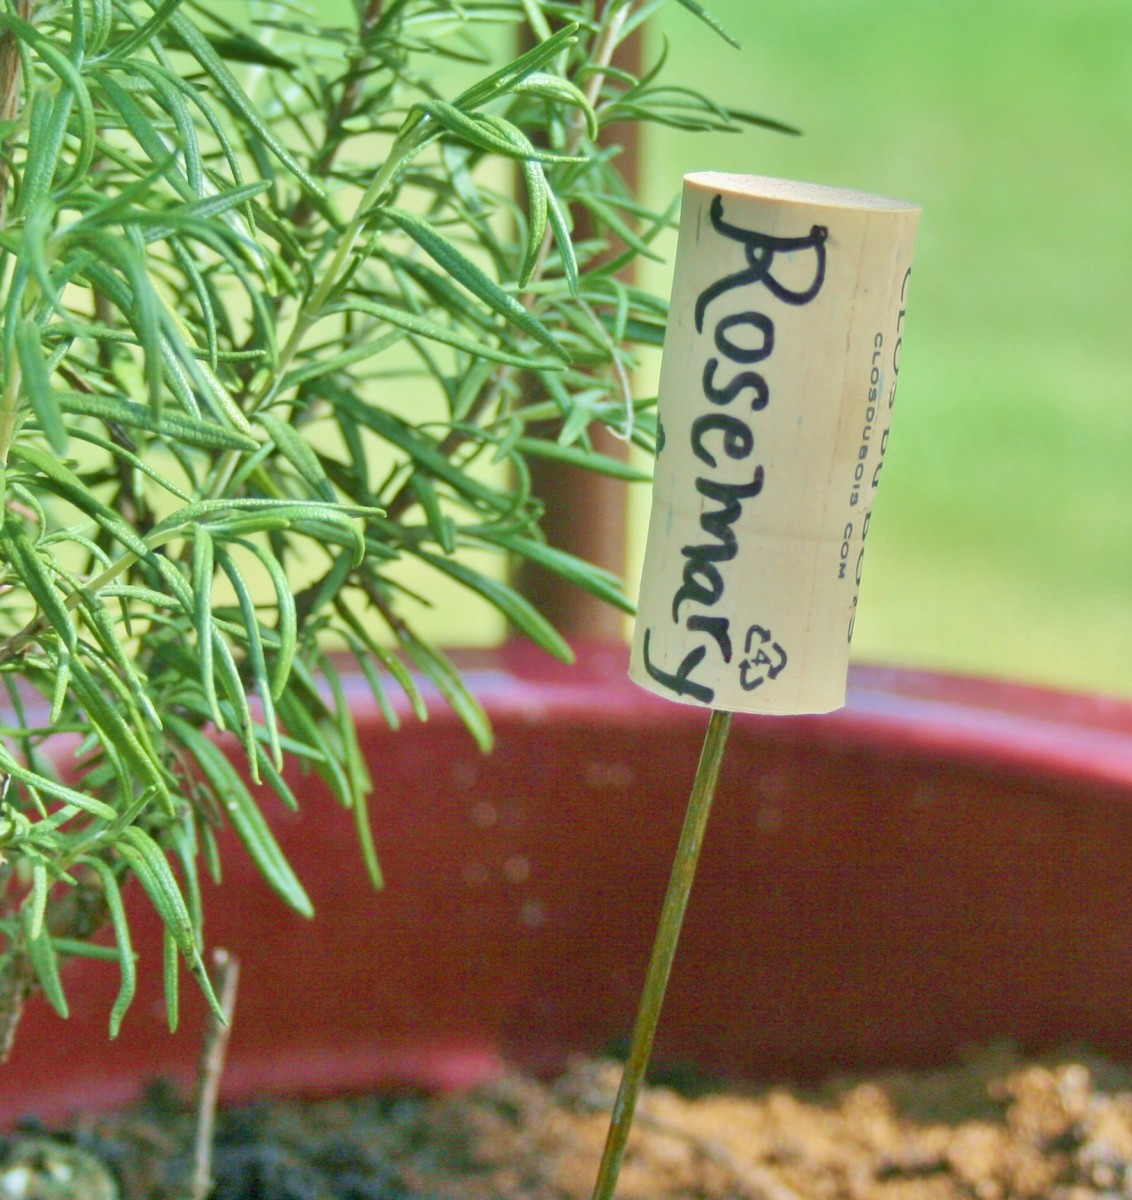 An old wine bottle cork, a bit of coat hanger wire & a Sharpie are all you need to make this cute plant marker.